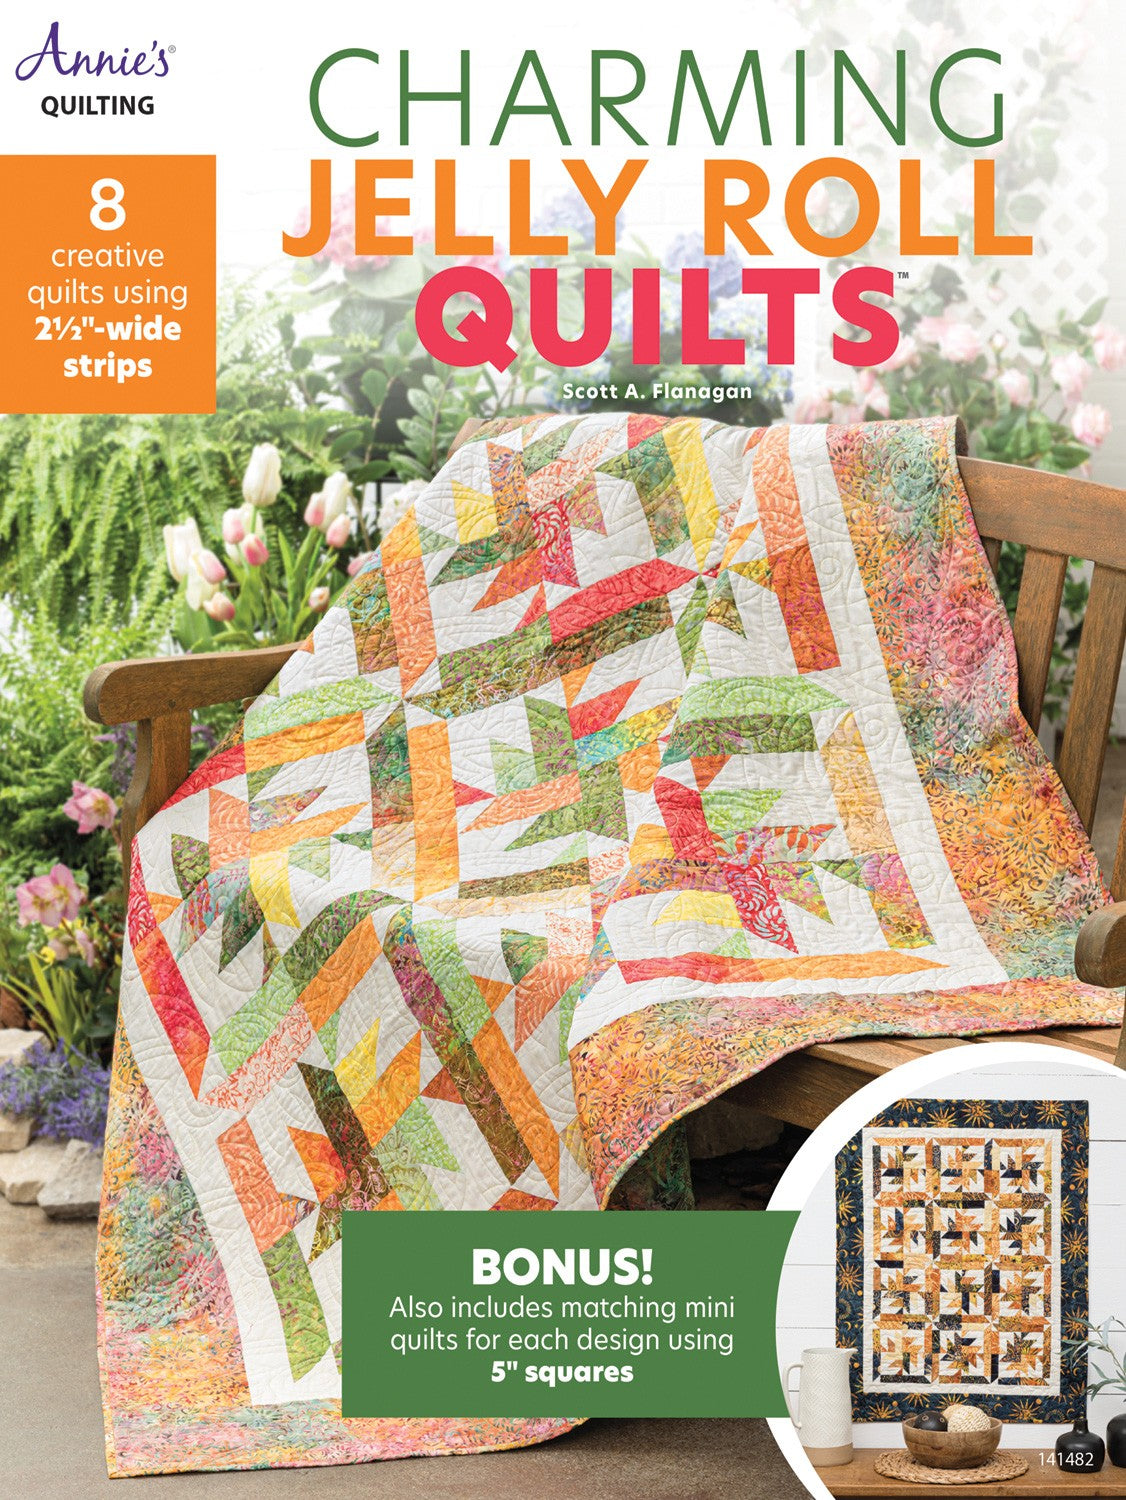 Charming Jelly Roll Quilts, Book